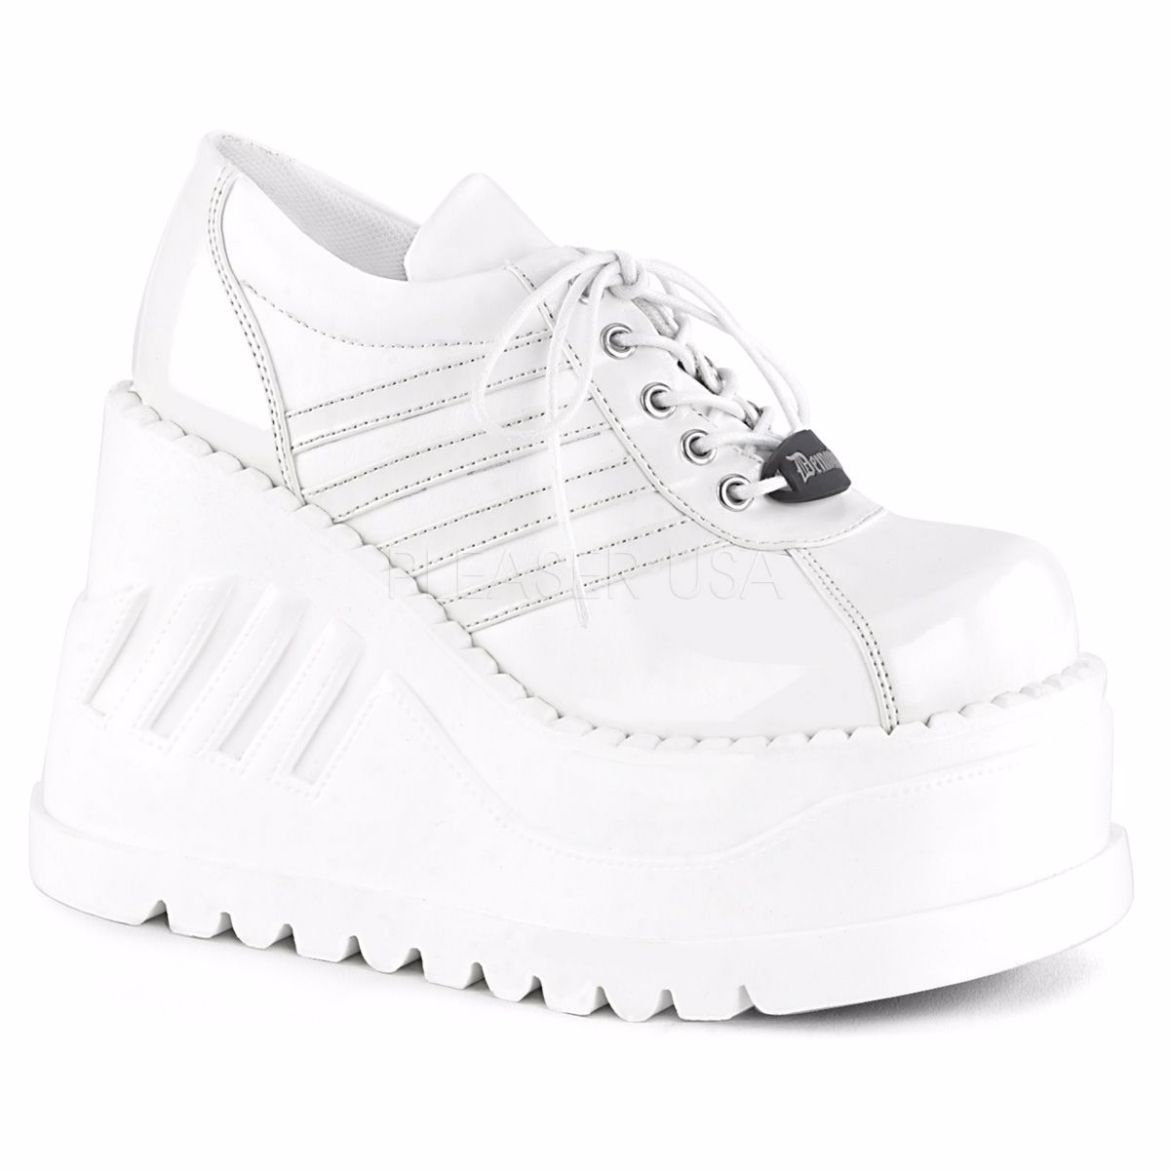 Product image of Demonia STOMP-08 White Patent-Vegan Faux Leather 4 3/4 inch Wedge Platform Lace-Up Shoe